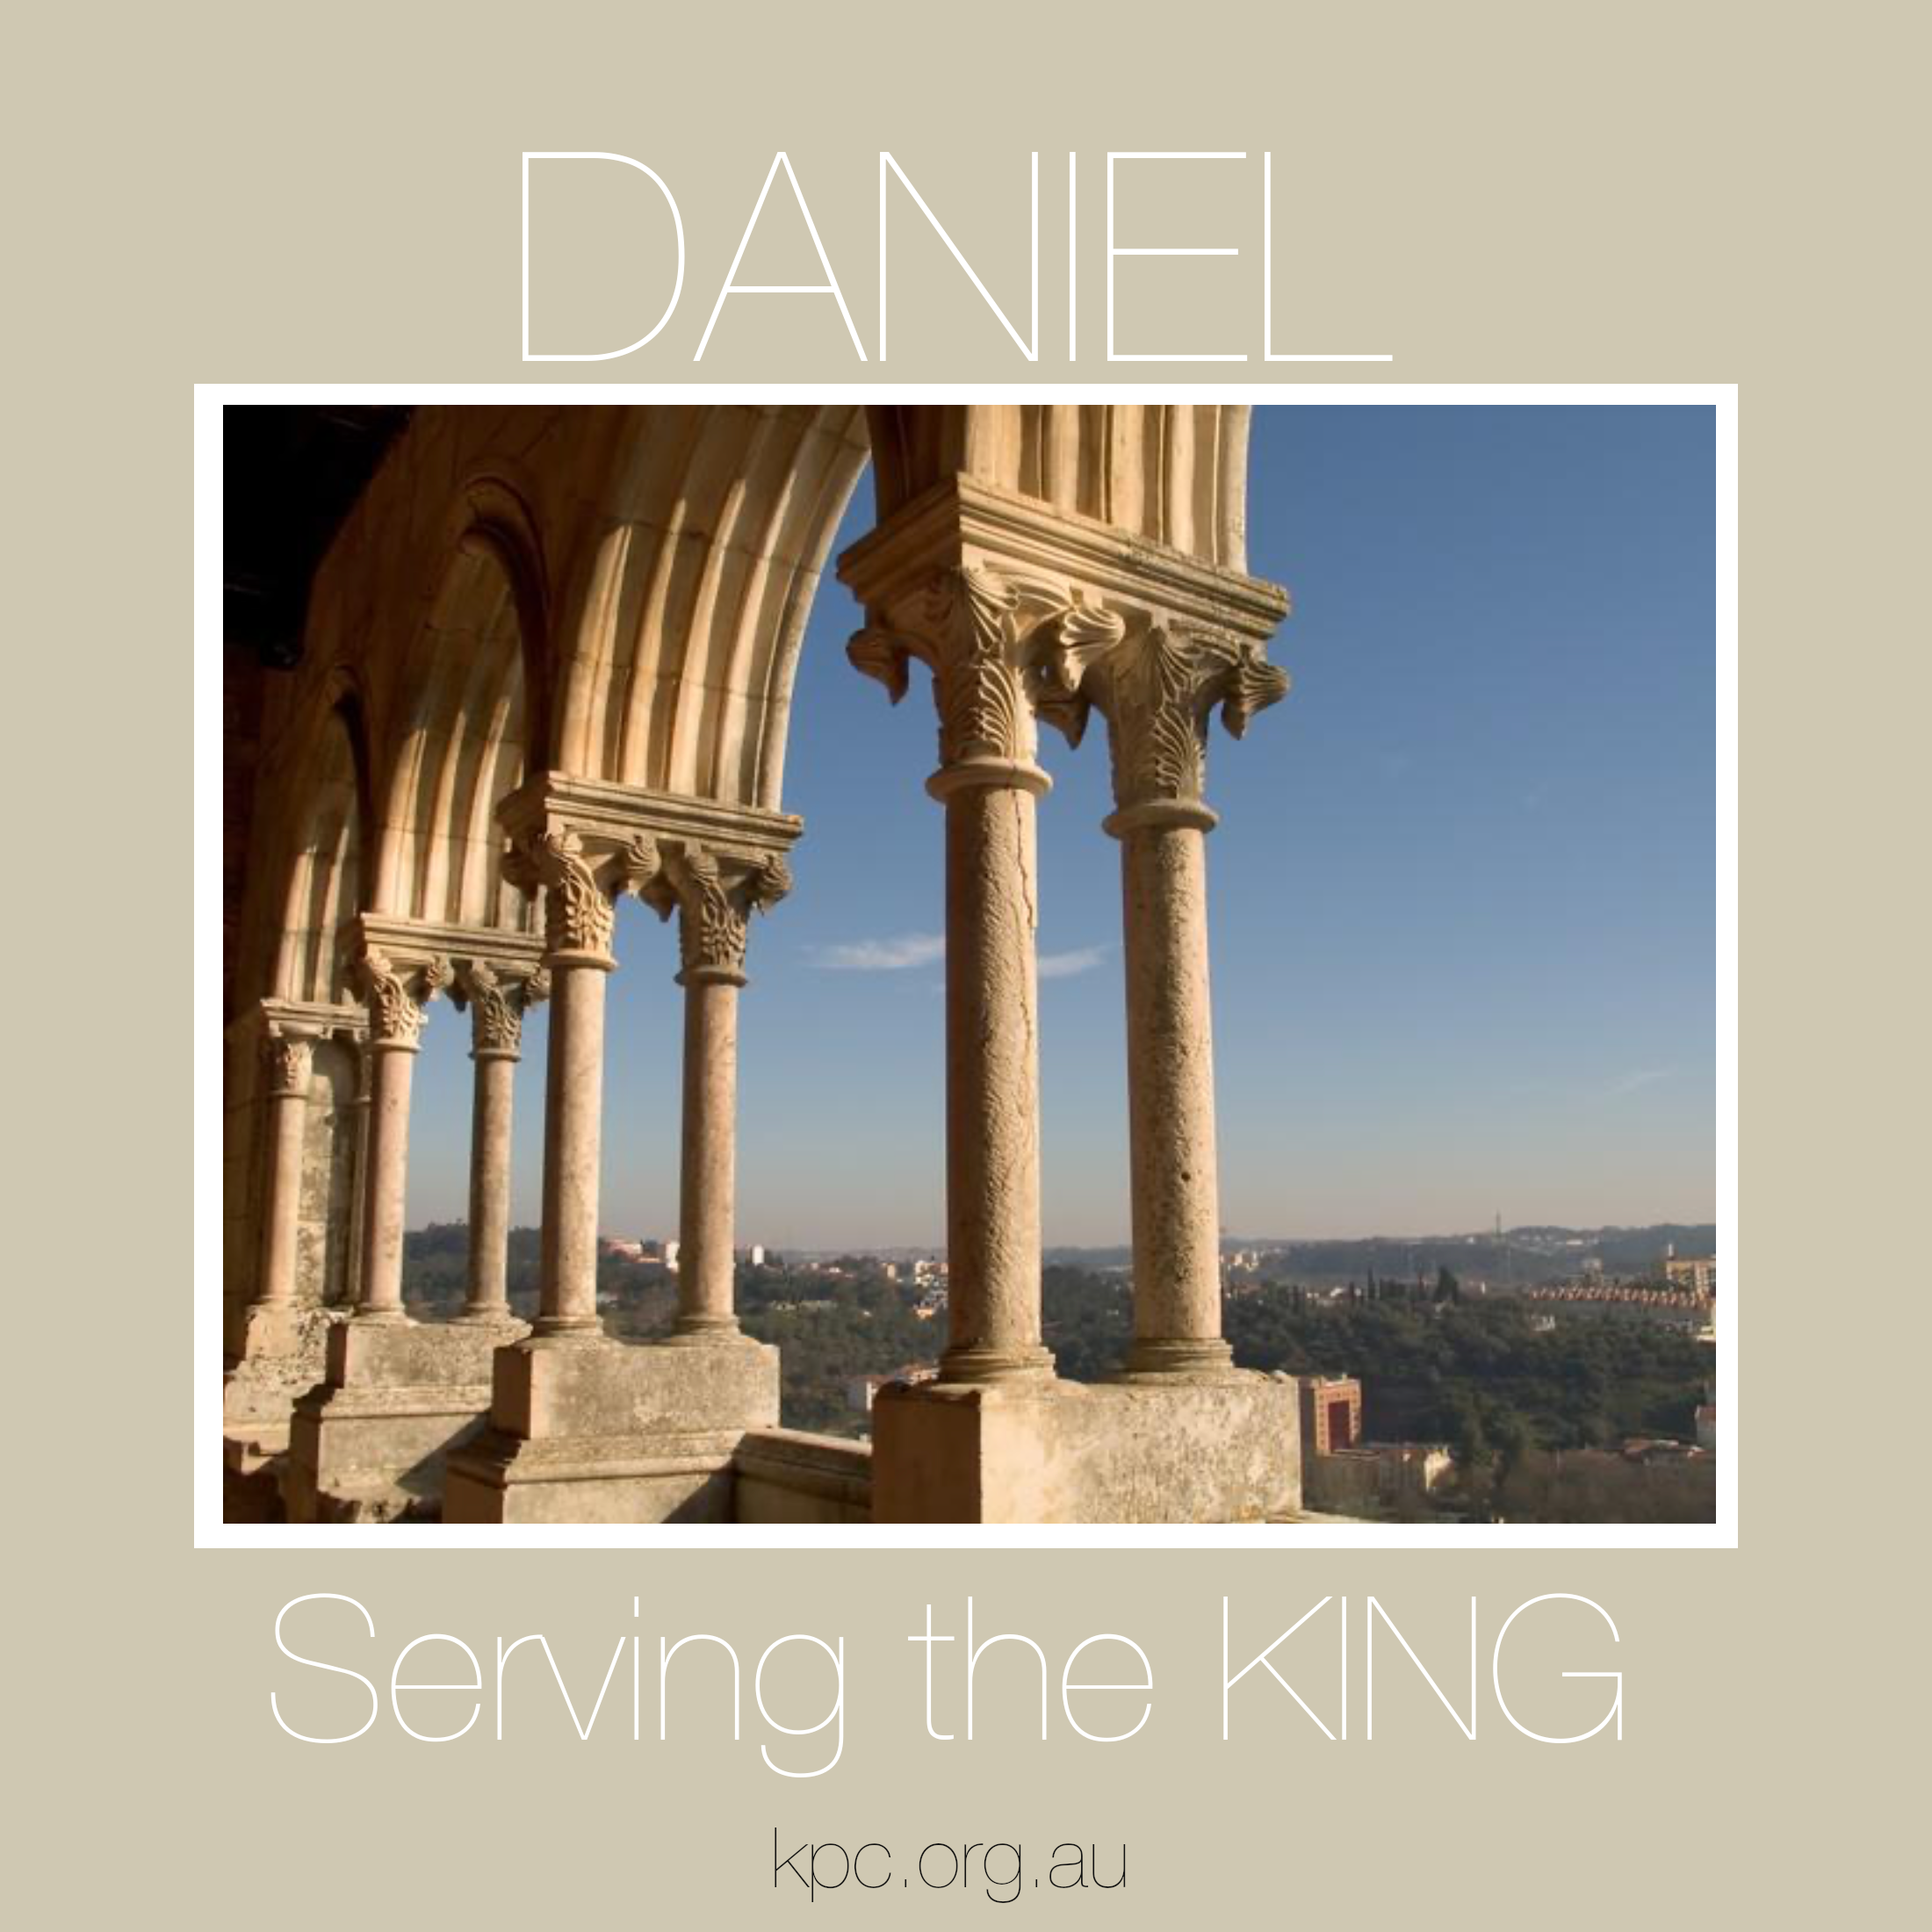 It’s all part of the plan (Daniel 10-12)